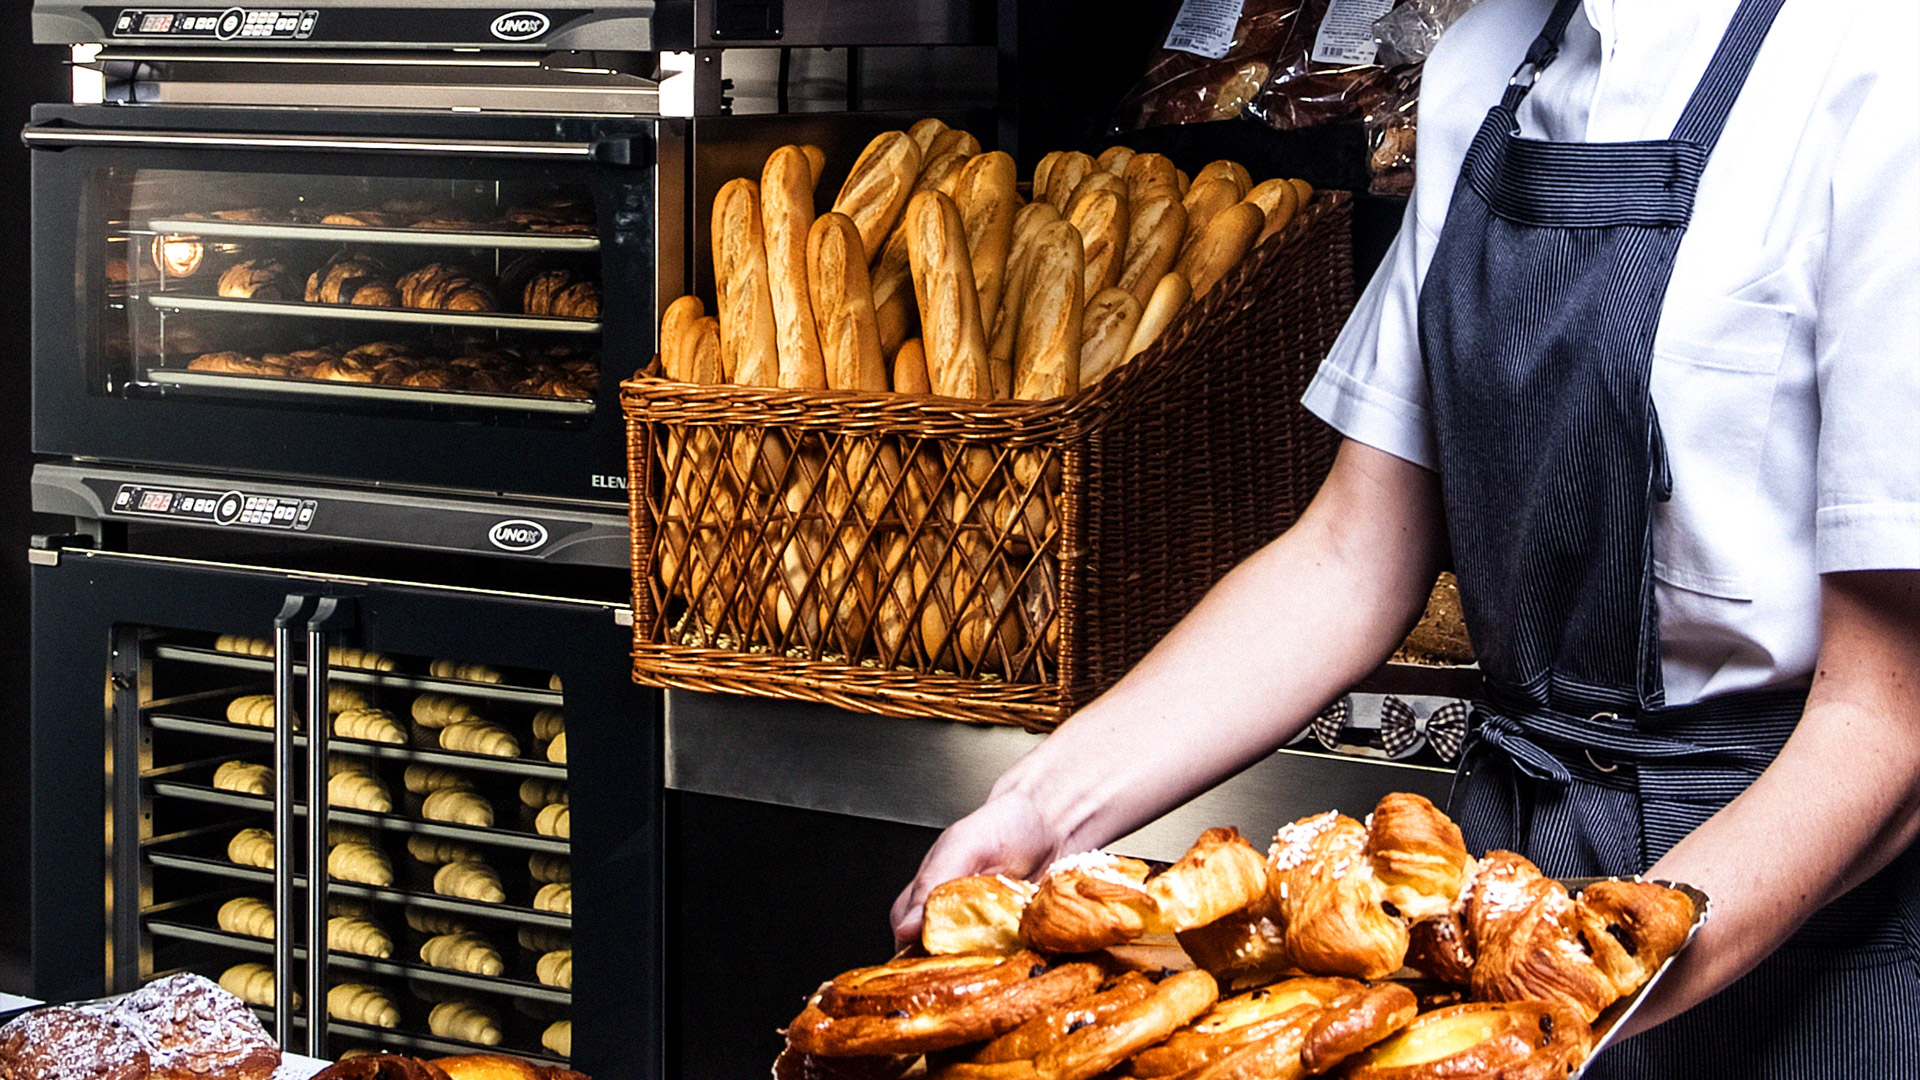 The no-frills oven for Bakery and Patisserie